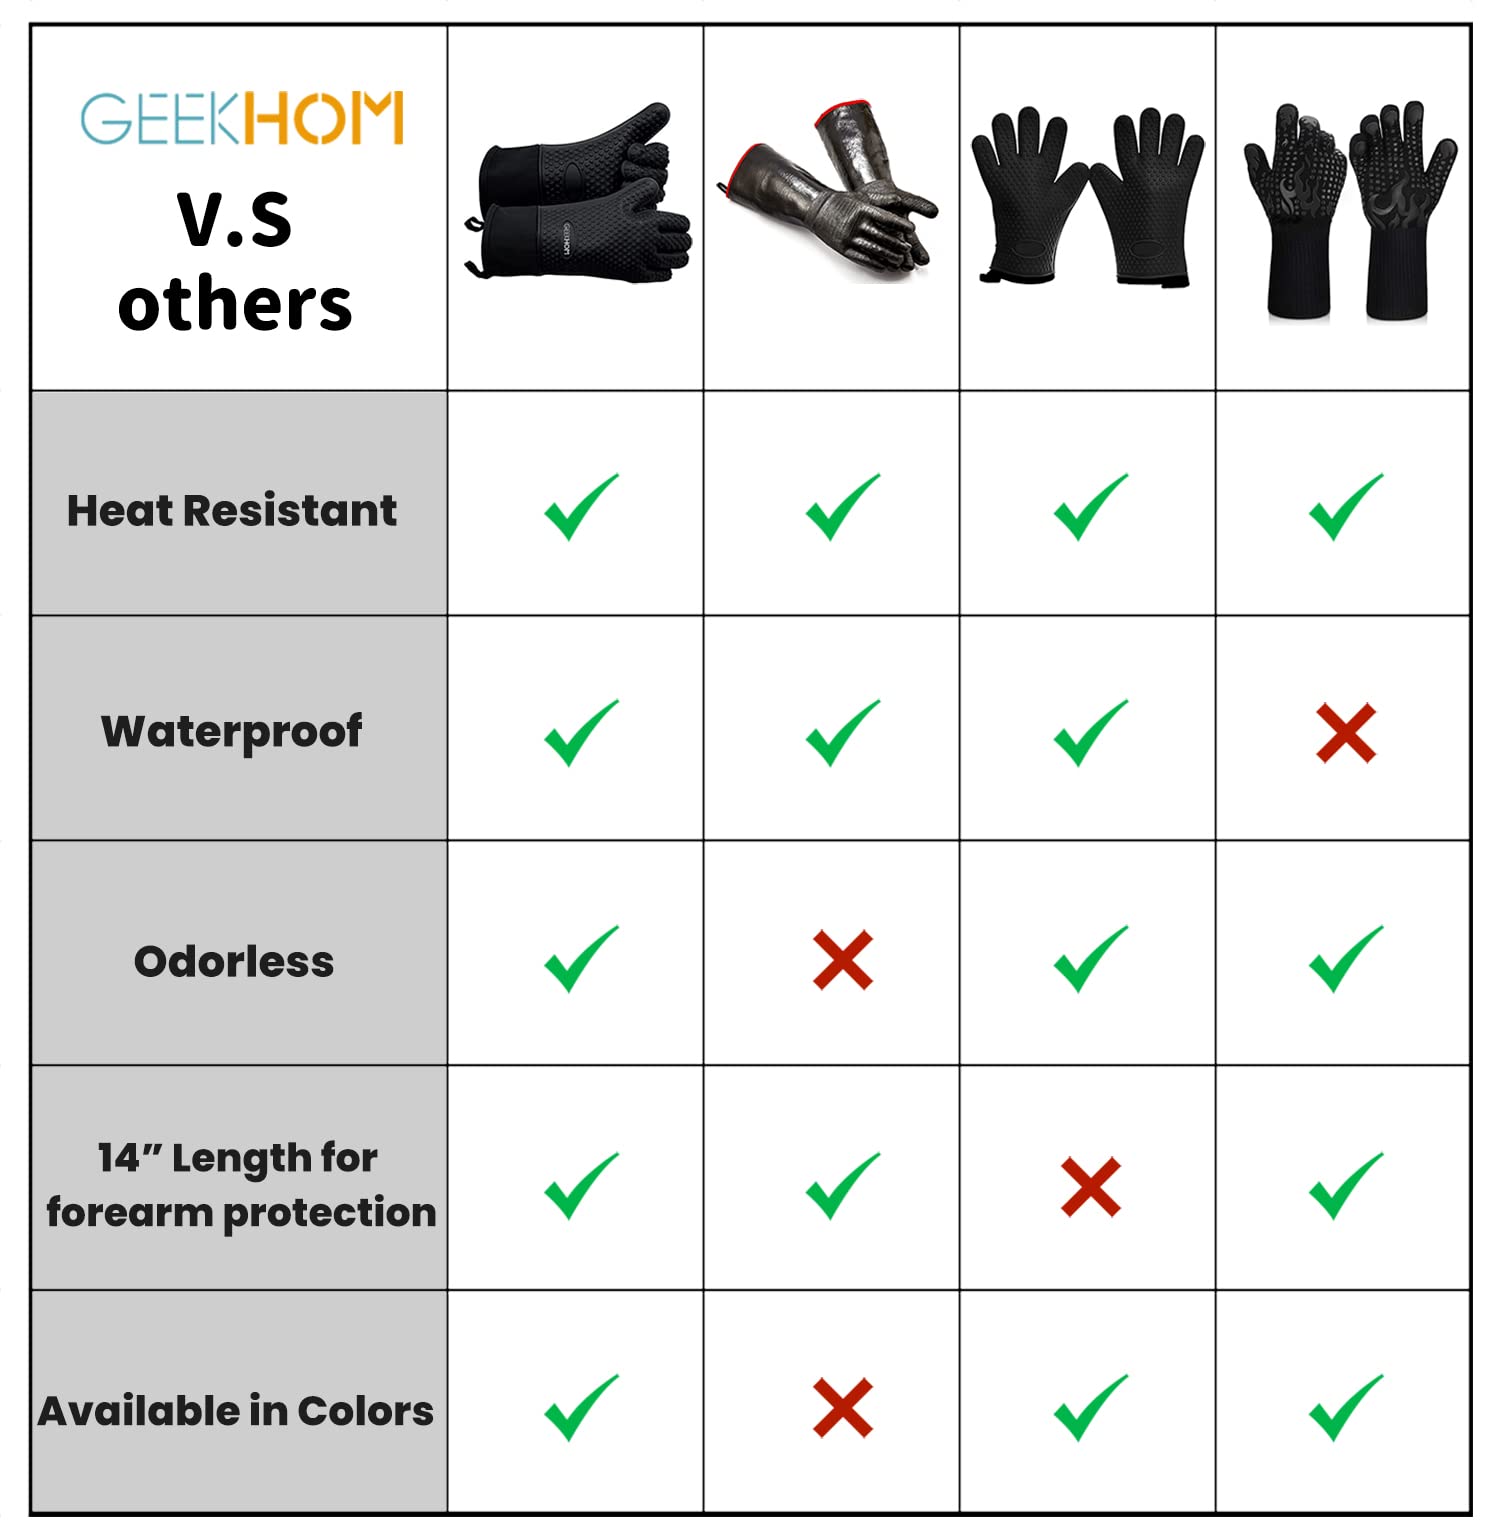 GEEKHOM BBQ Gloves, Grilling Gloves Heat Resistant Oven Gloves, Kitchen Silicone Oven Mitts, Long Waterproof Non-Slip Pot Holder for Barbecue, Cooking, Baking (Black)